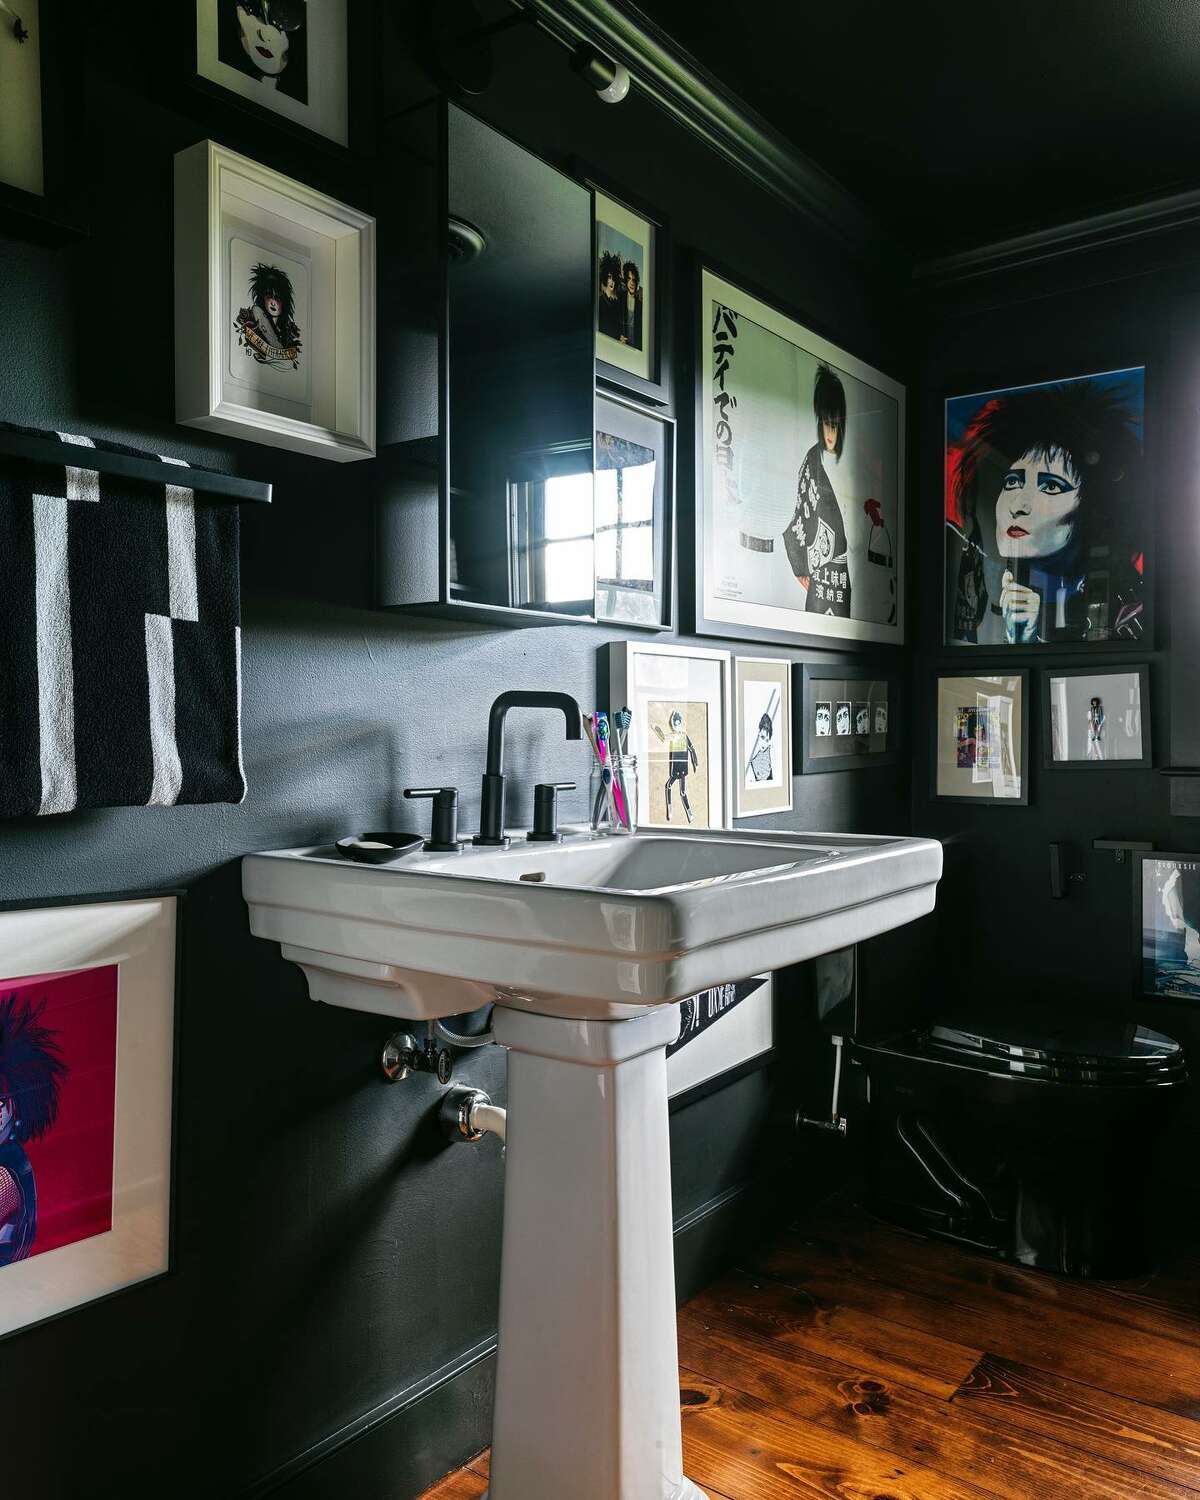 The black bathroom is an homage to British band Siouxsie and the Banshees.